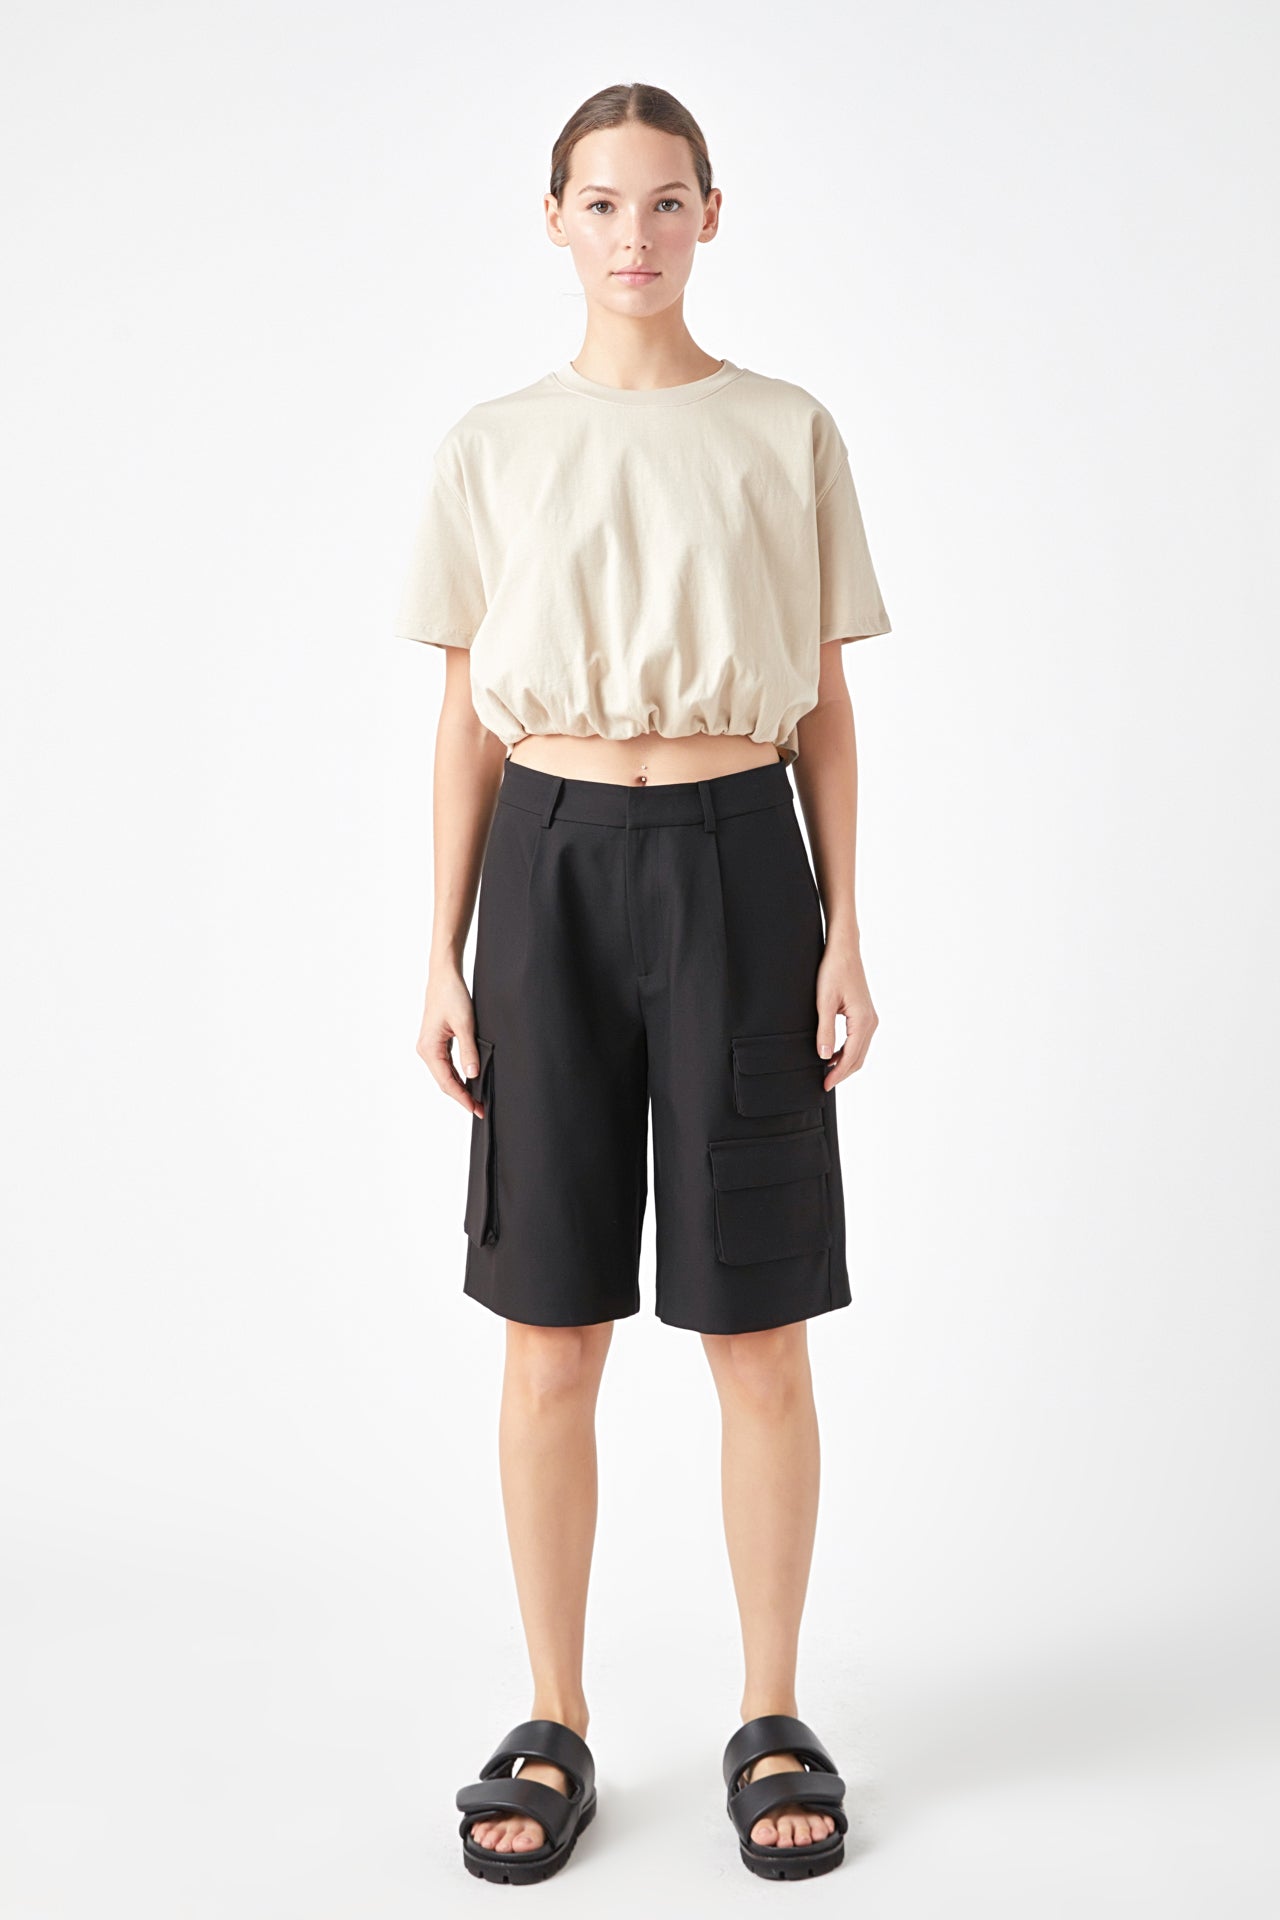 GREY LAB - Cropped Top with Elastic Band - TOPS available at Objectrare